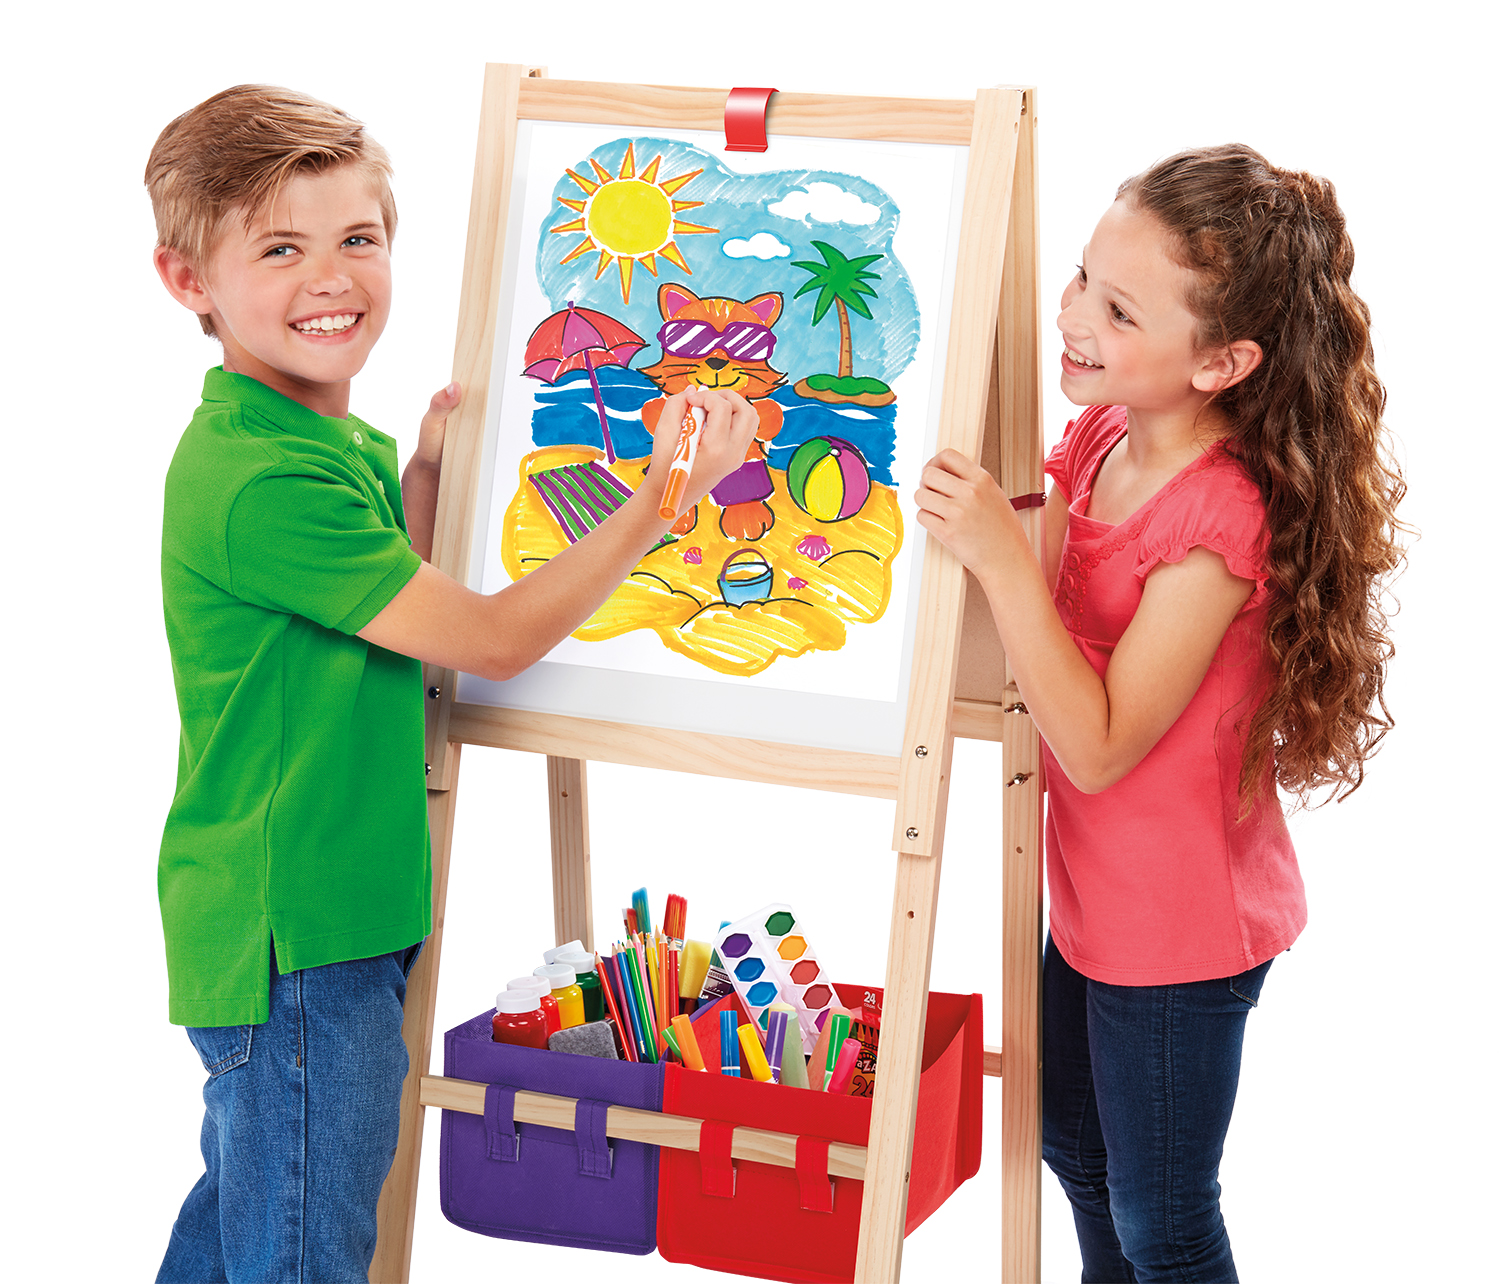 Cra-Z-Art 37"- 43" Double-Sided Wood Children's Art Easel, Child Ages 4 and up - image 3 of 9